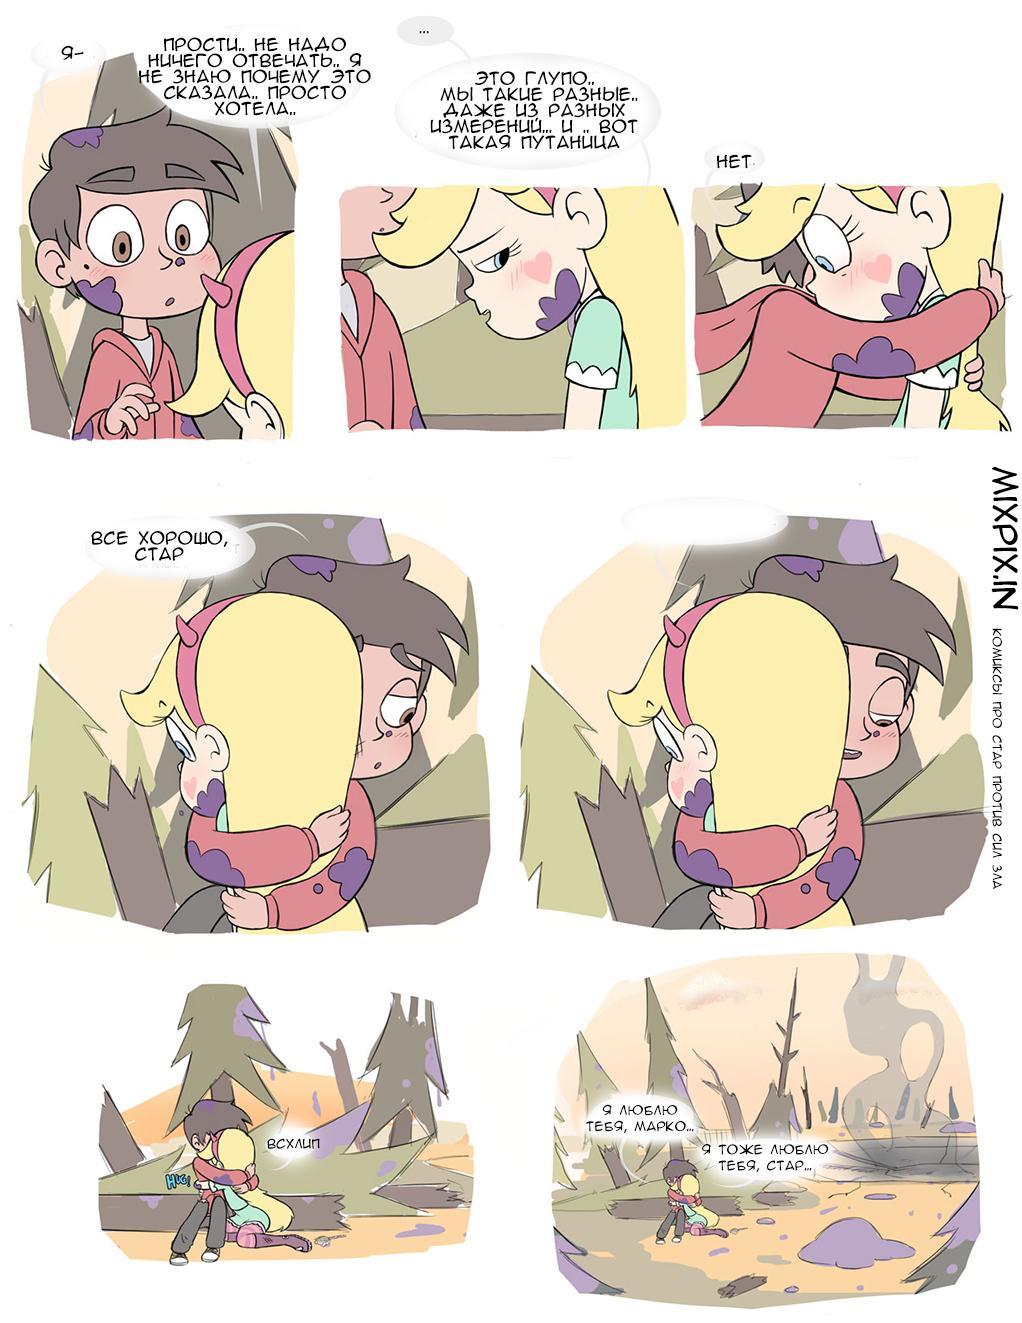 Star vs. the forces of evil Comic (Hard fight) StarMarko - Star vs Forces of Evil, Cartoons, Comics, Star butterfly, Marco diaz, Starco, Longpost